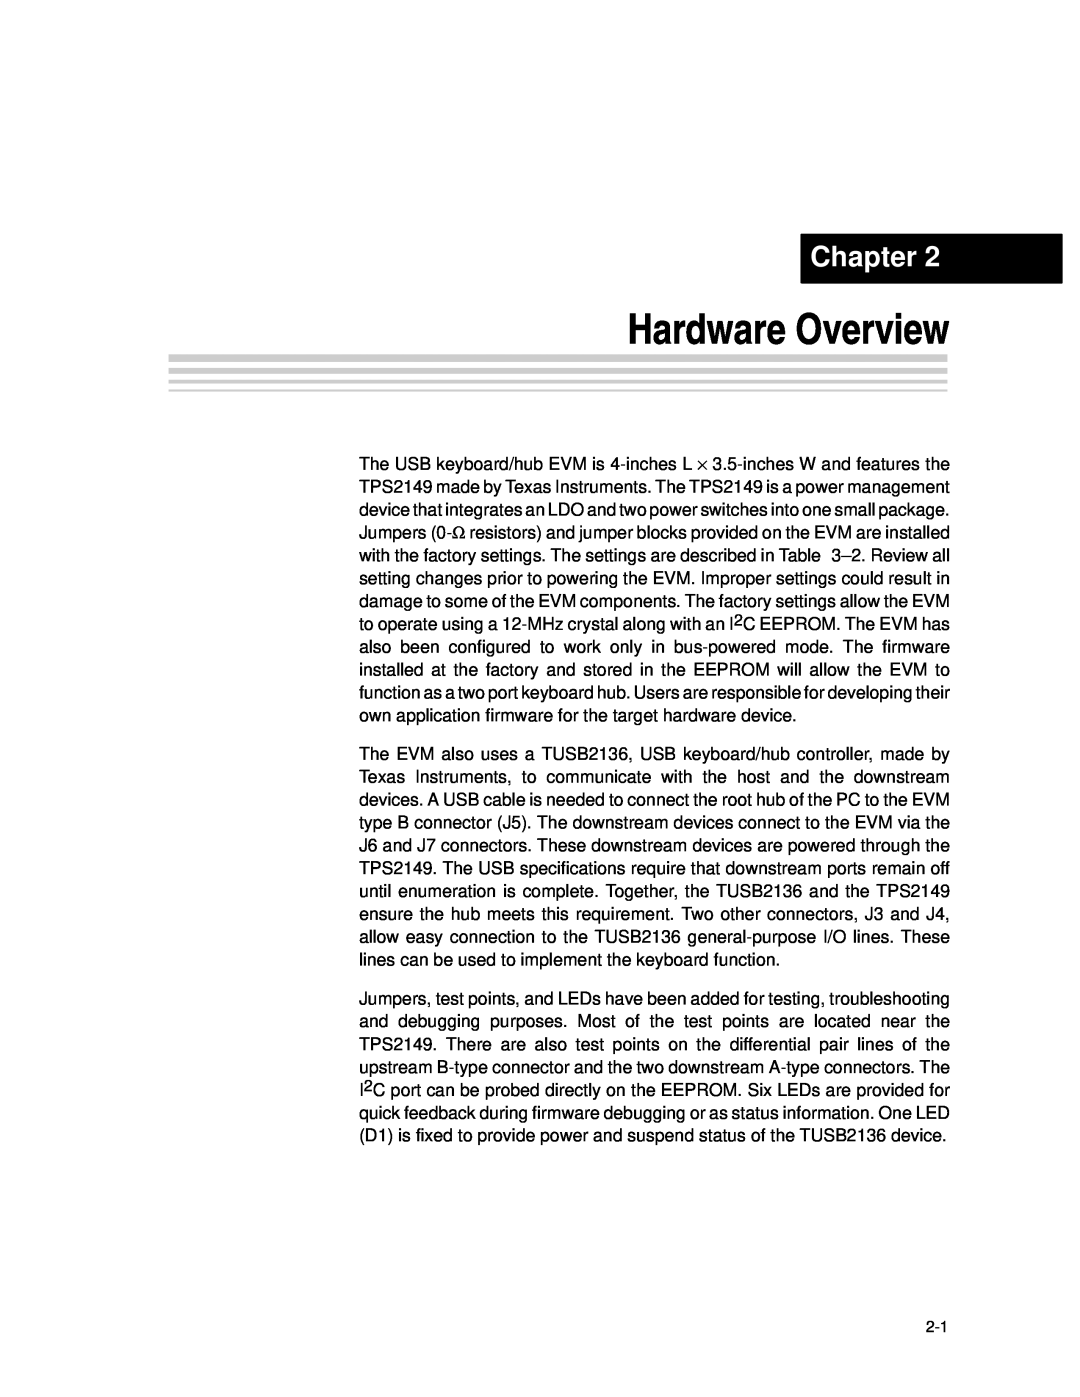 Texas Instruments TPS2149 manual Hardware Overview, Chapter 